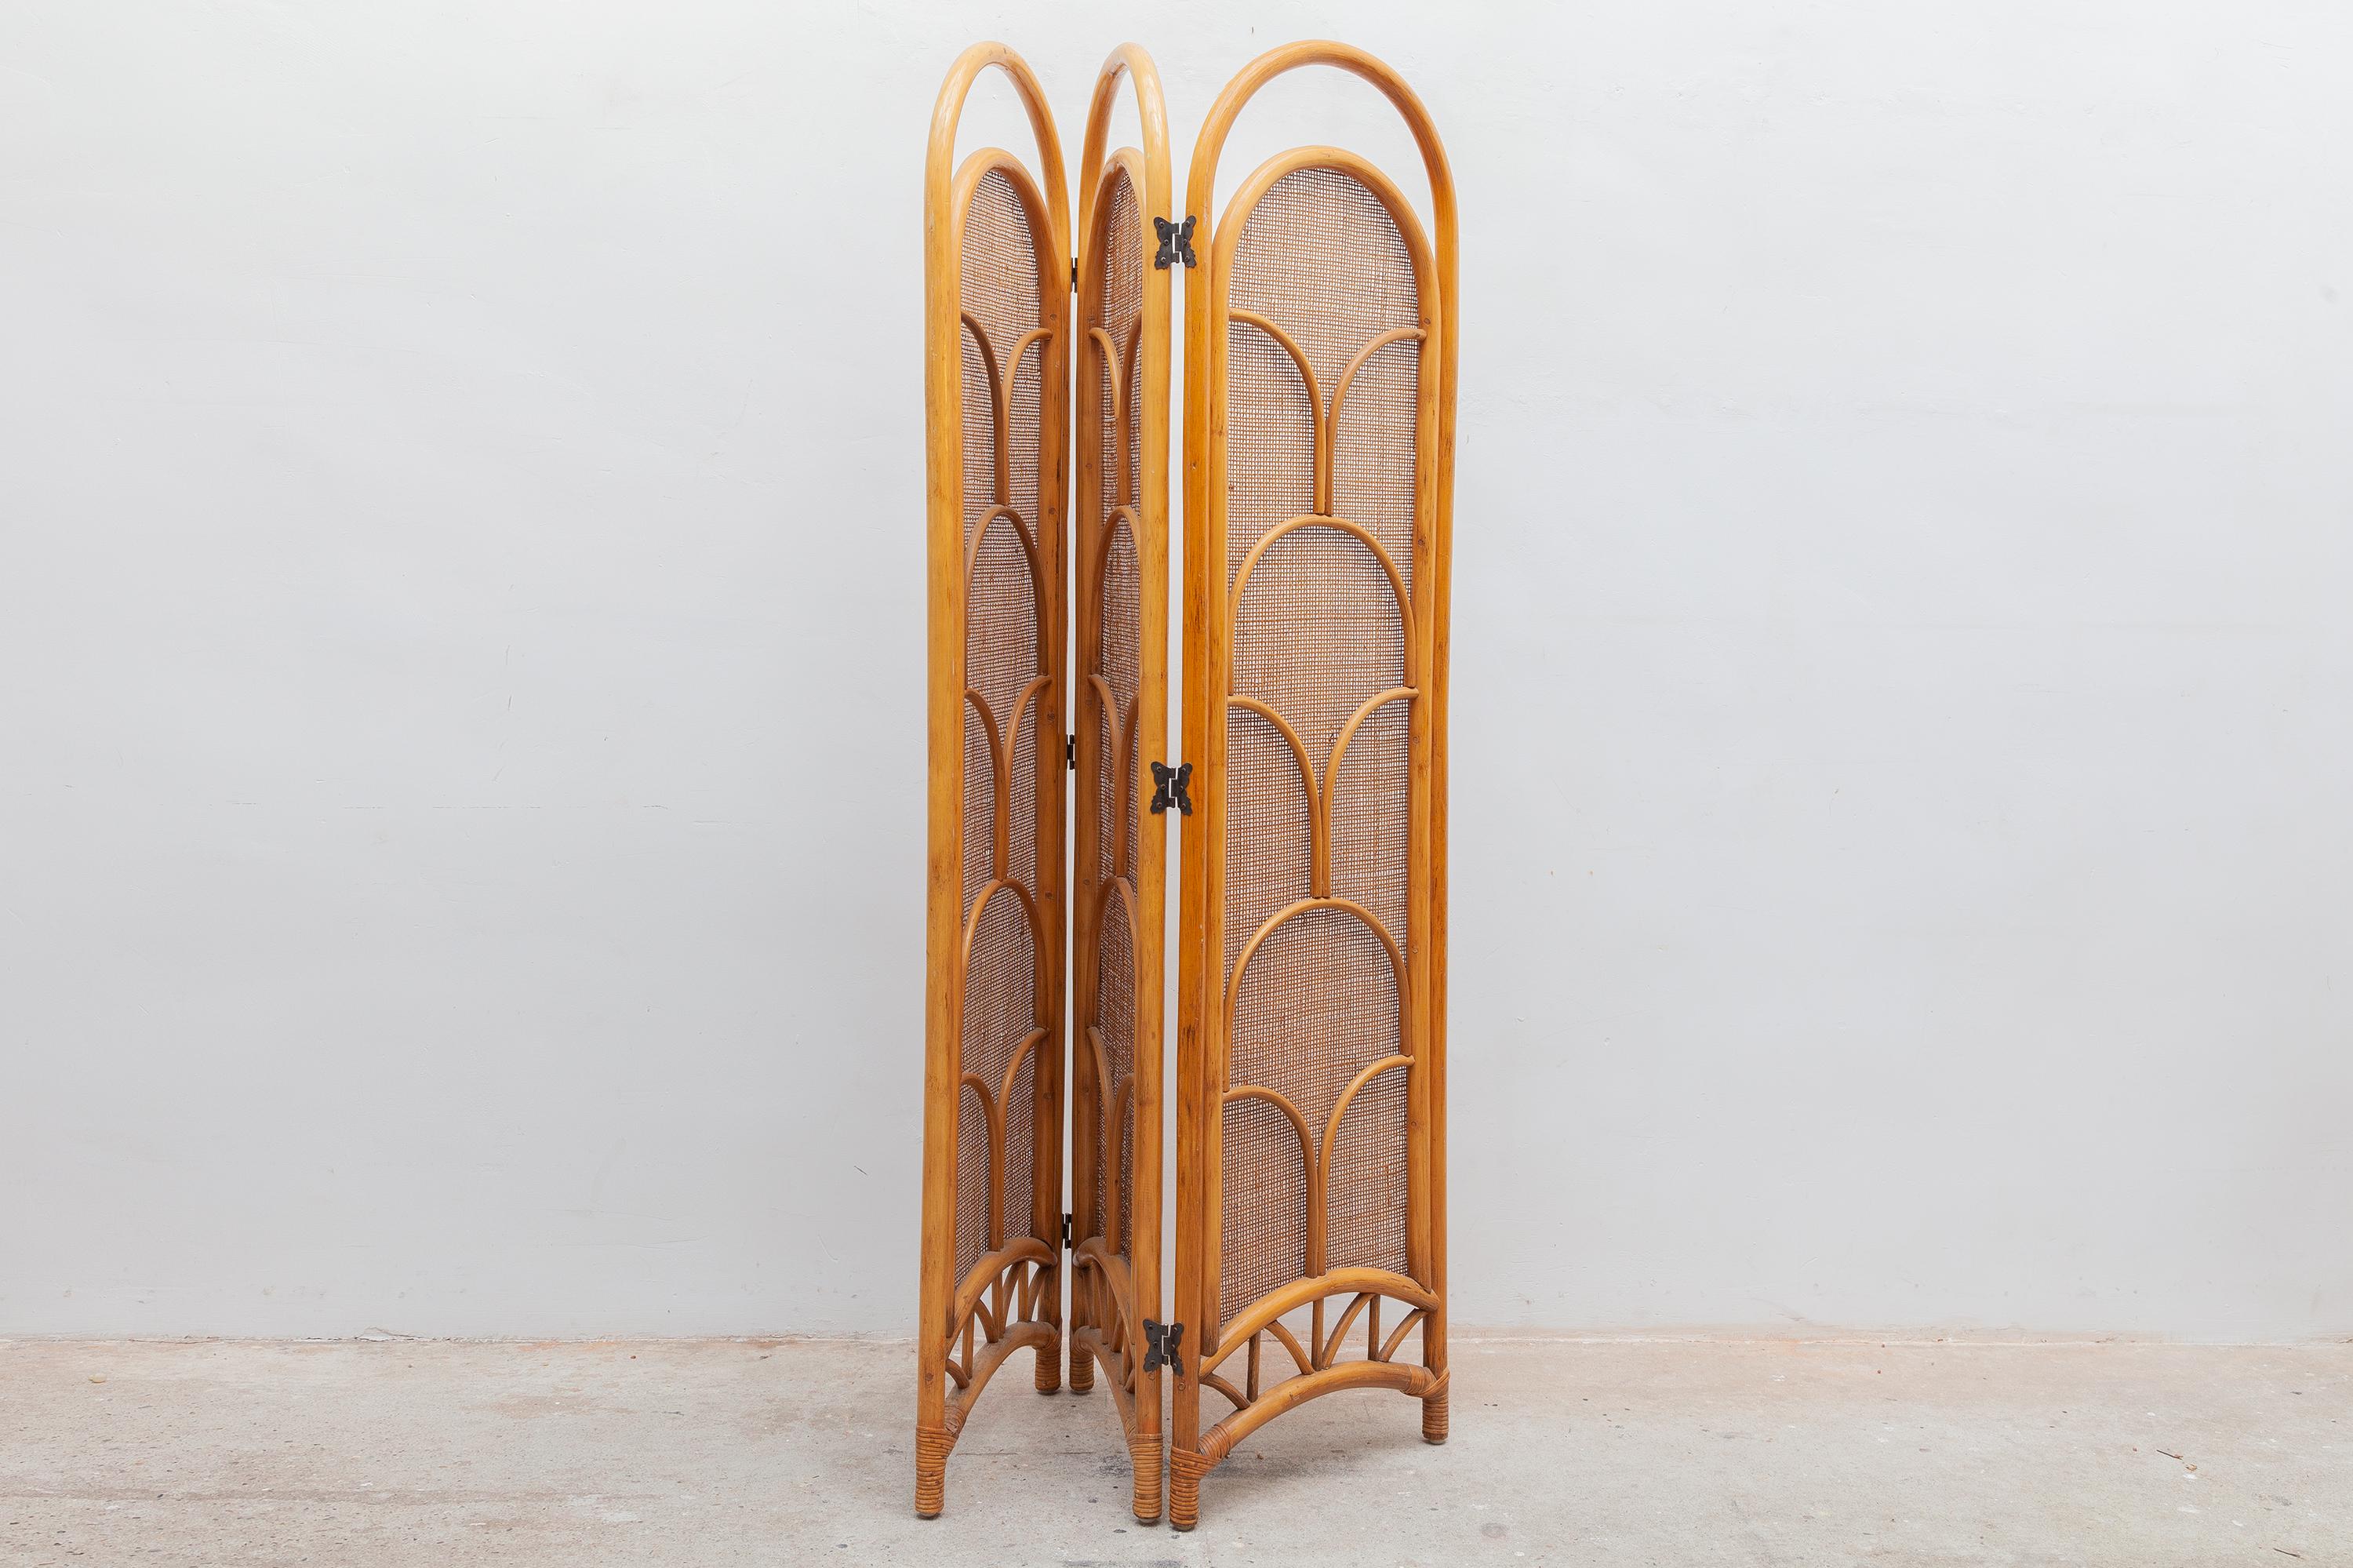 Vintage bamboo room screen. Three panels with caned mesh and decorative butterfly shaped hinges. Dimensions: 134 W x 175 H x 4 D cm.